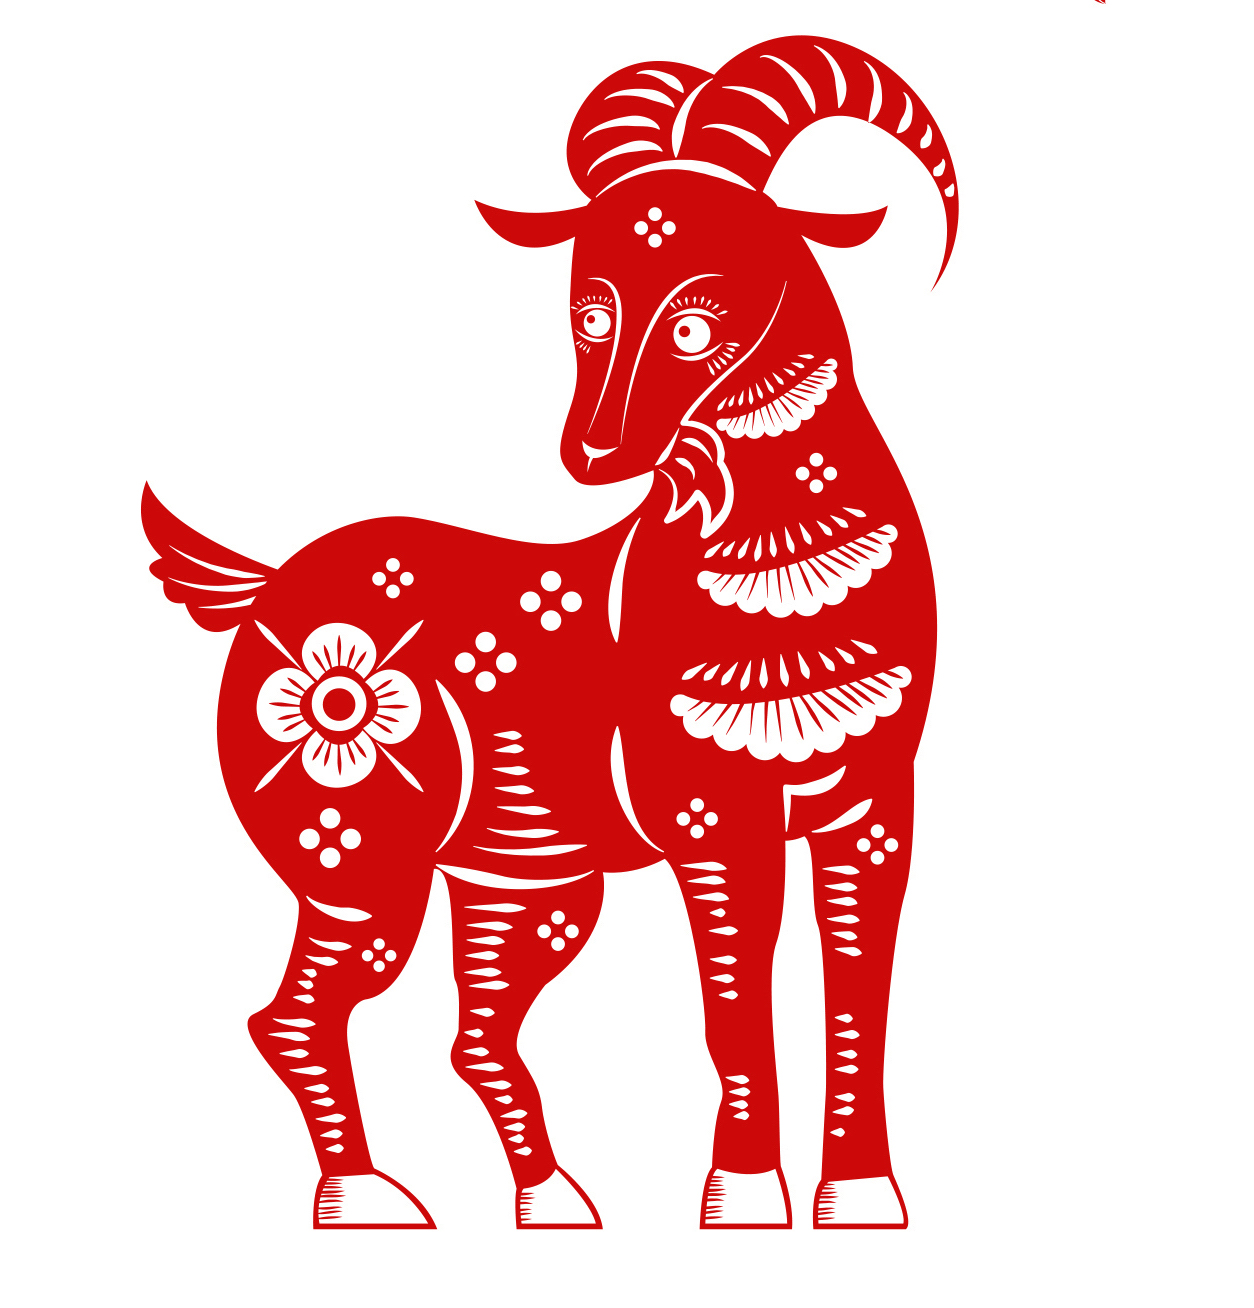 Goat zodiac forecast: Beware of accidents and injuries in 2021